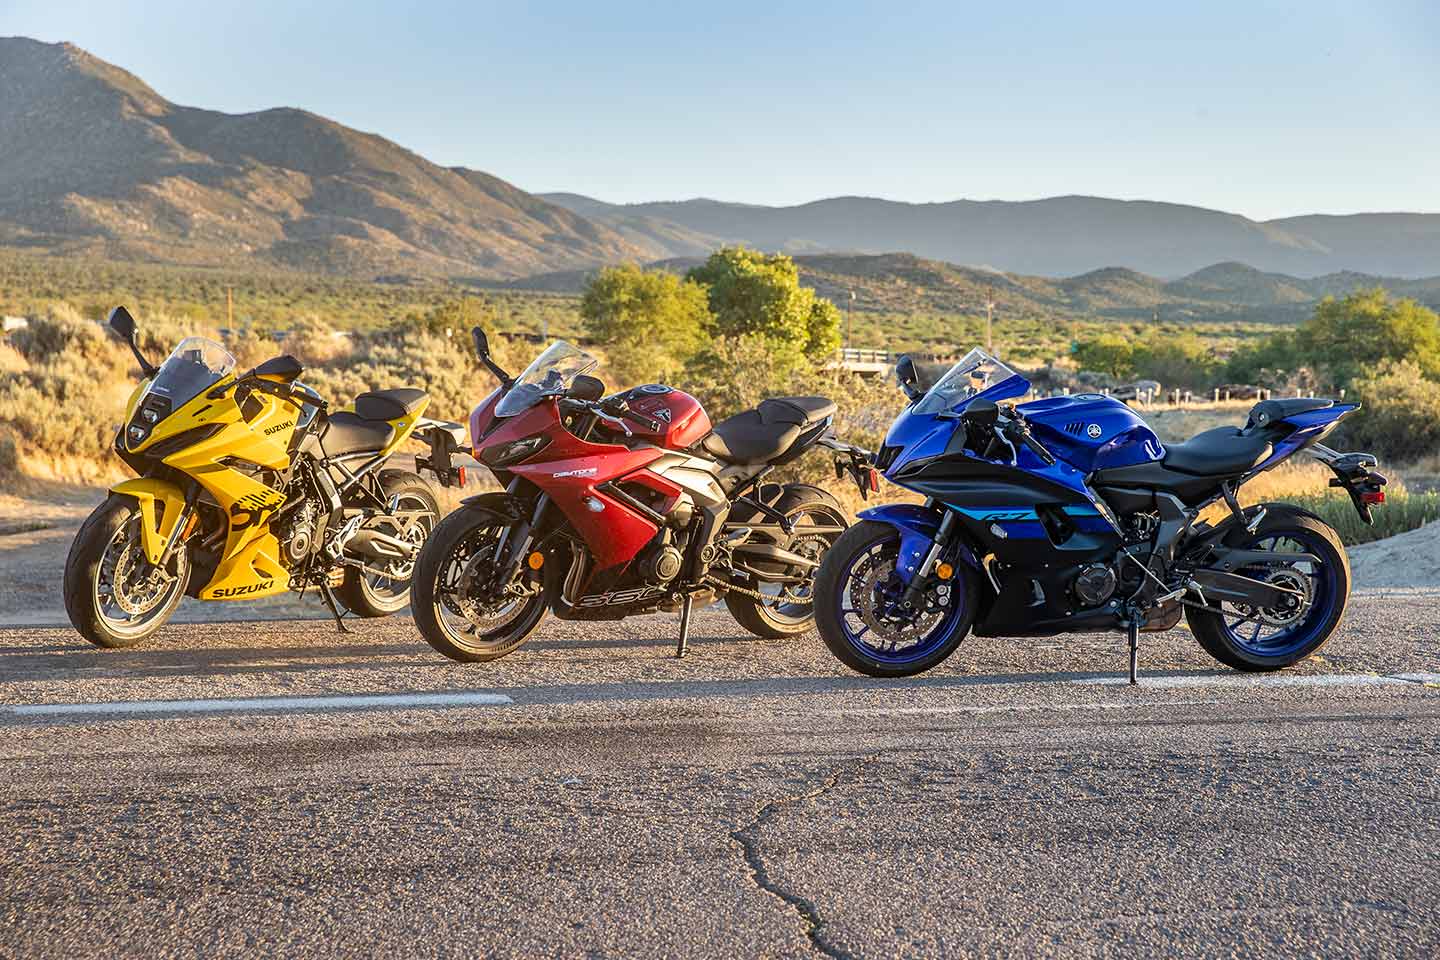 These three machines all utilize more budget-friendly components than race-oriented Supersports. For the consumer that means more affordable motorcycles.